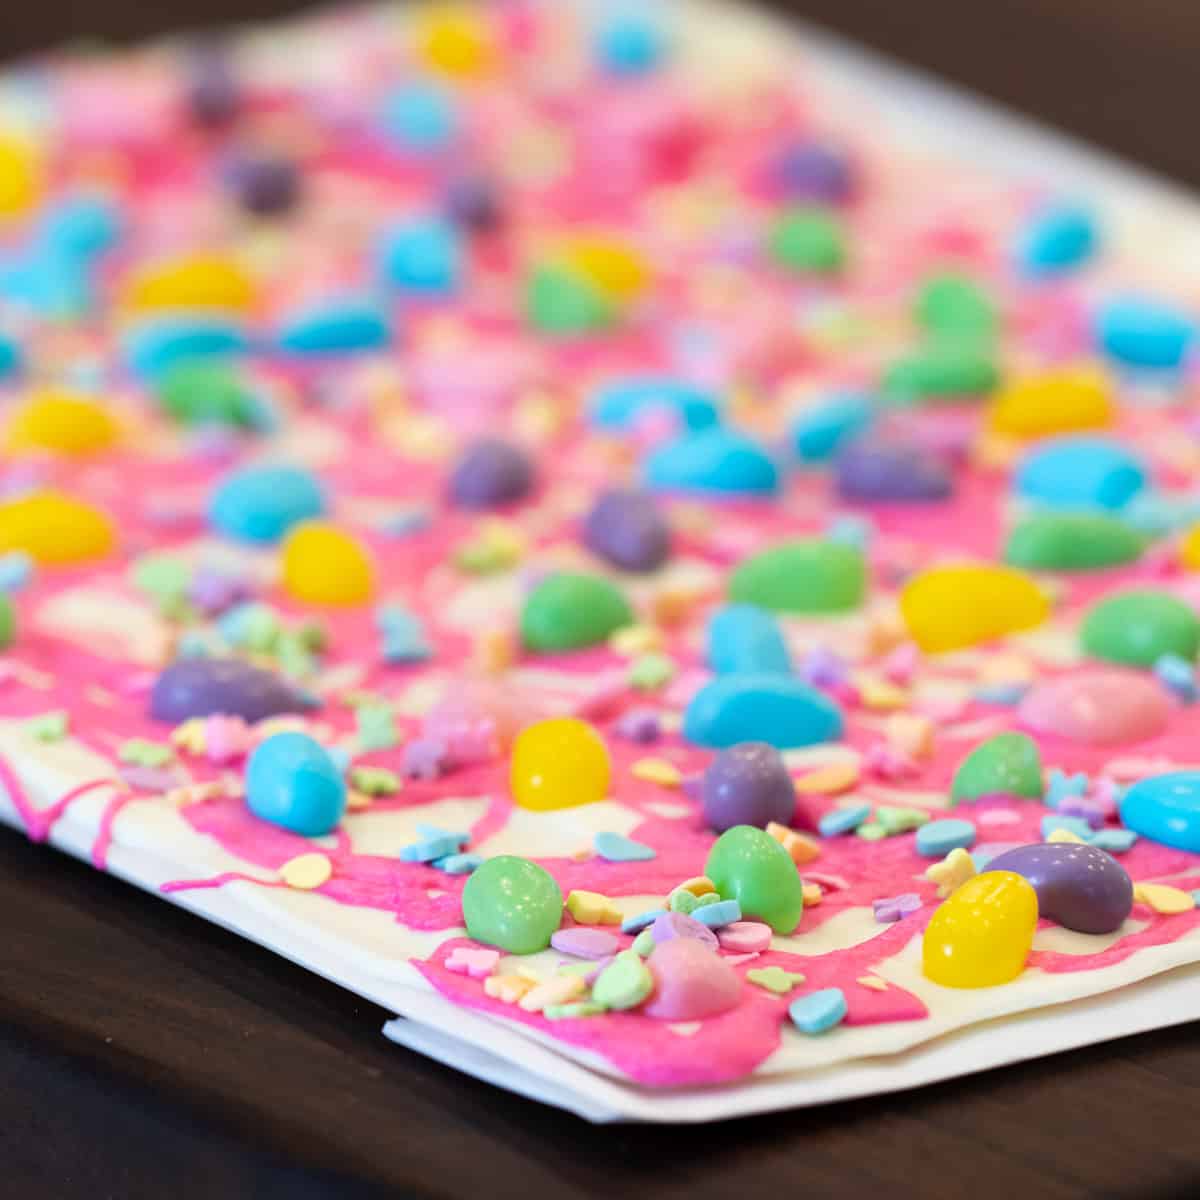 Chocolate bark with bright coloured jelly beans.